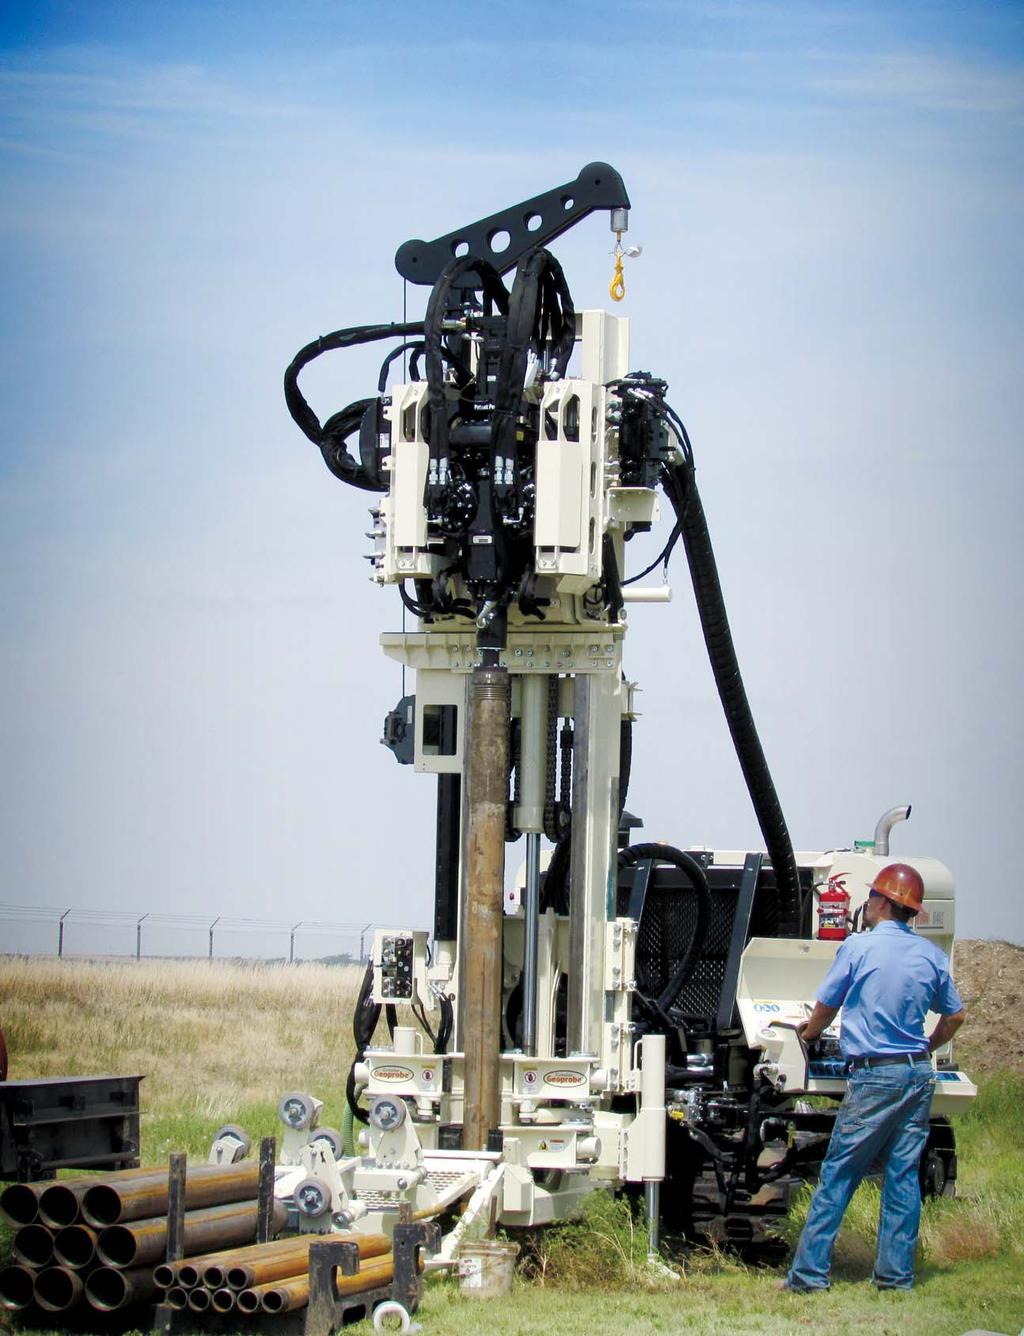 In Your Industry What Industries Use Geoprobe Sonic Tooling? Environmental Geotechnical Geothermal Exploration You are looking at Geoprobe 4x6 Sonic Tooling in Action. Seen here, 4.5 in.